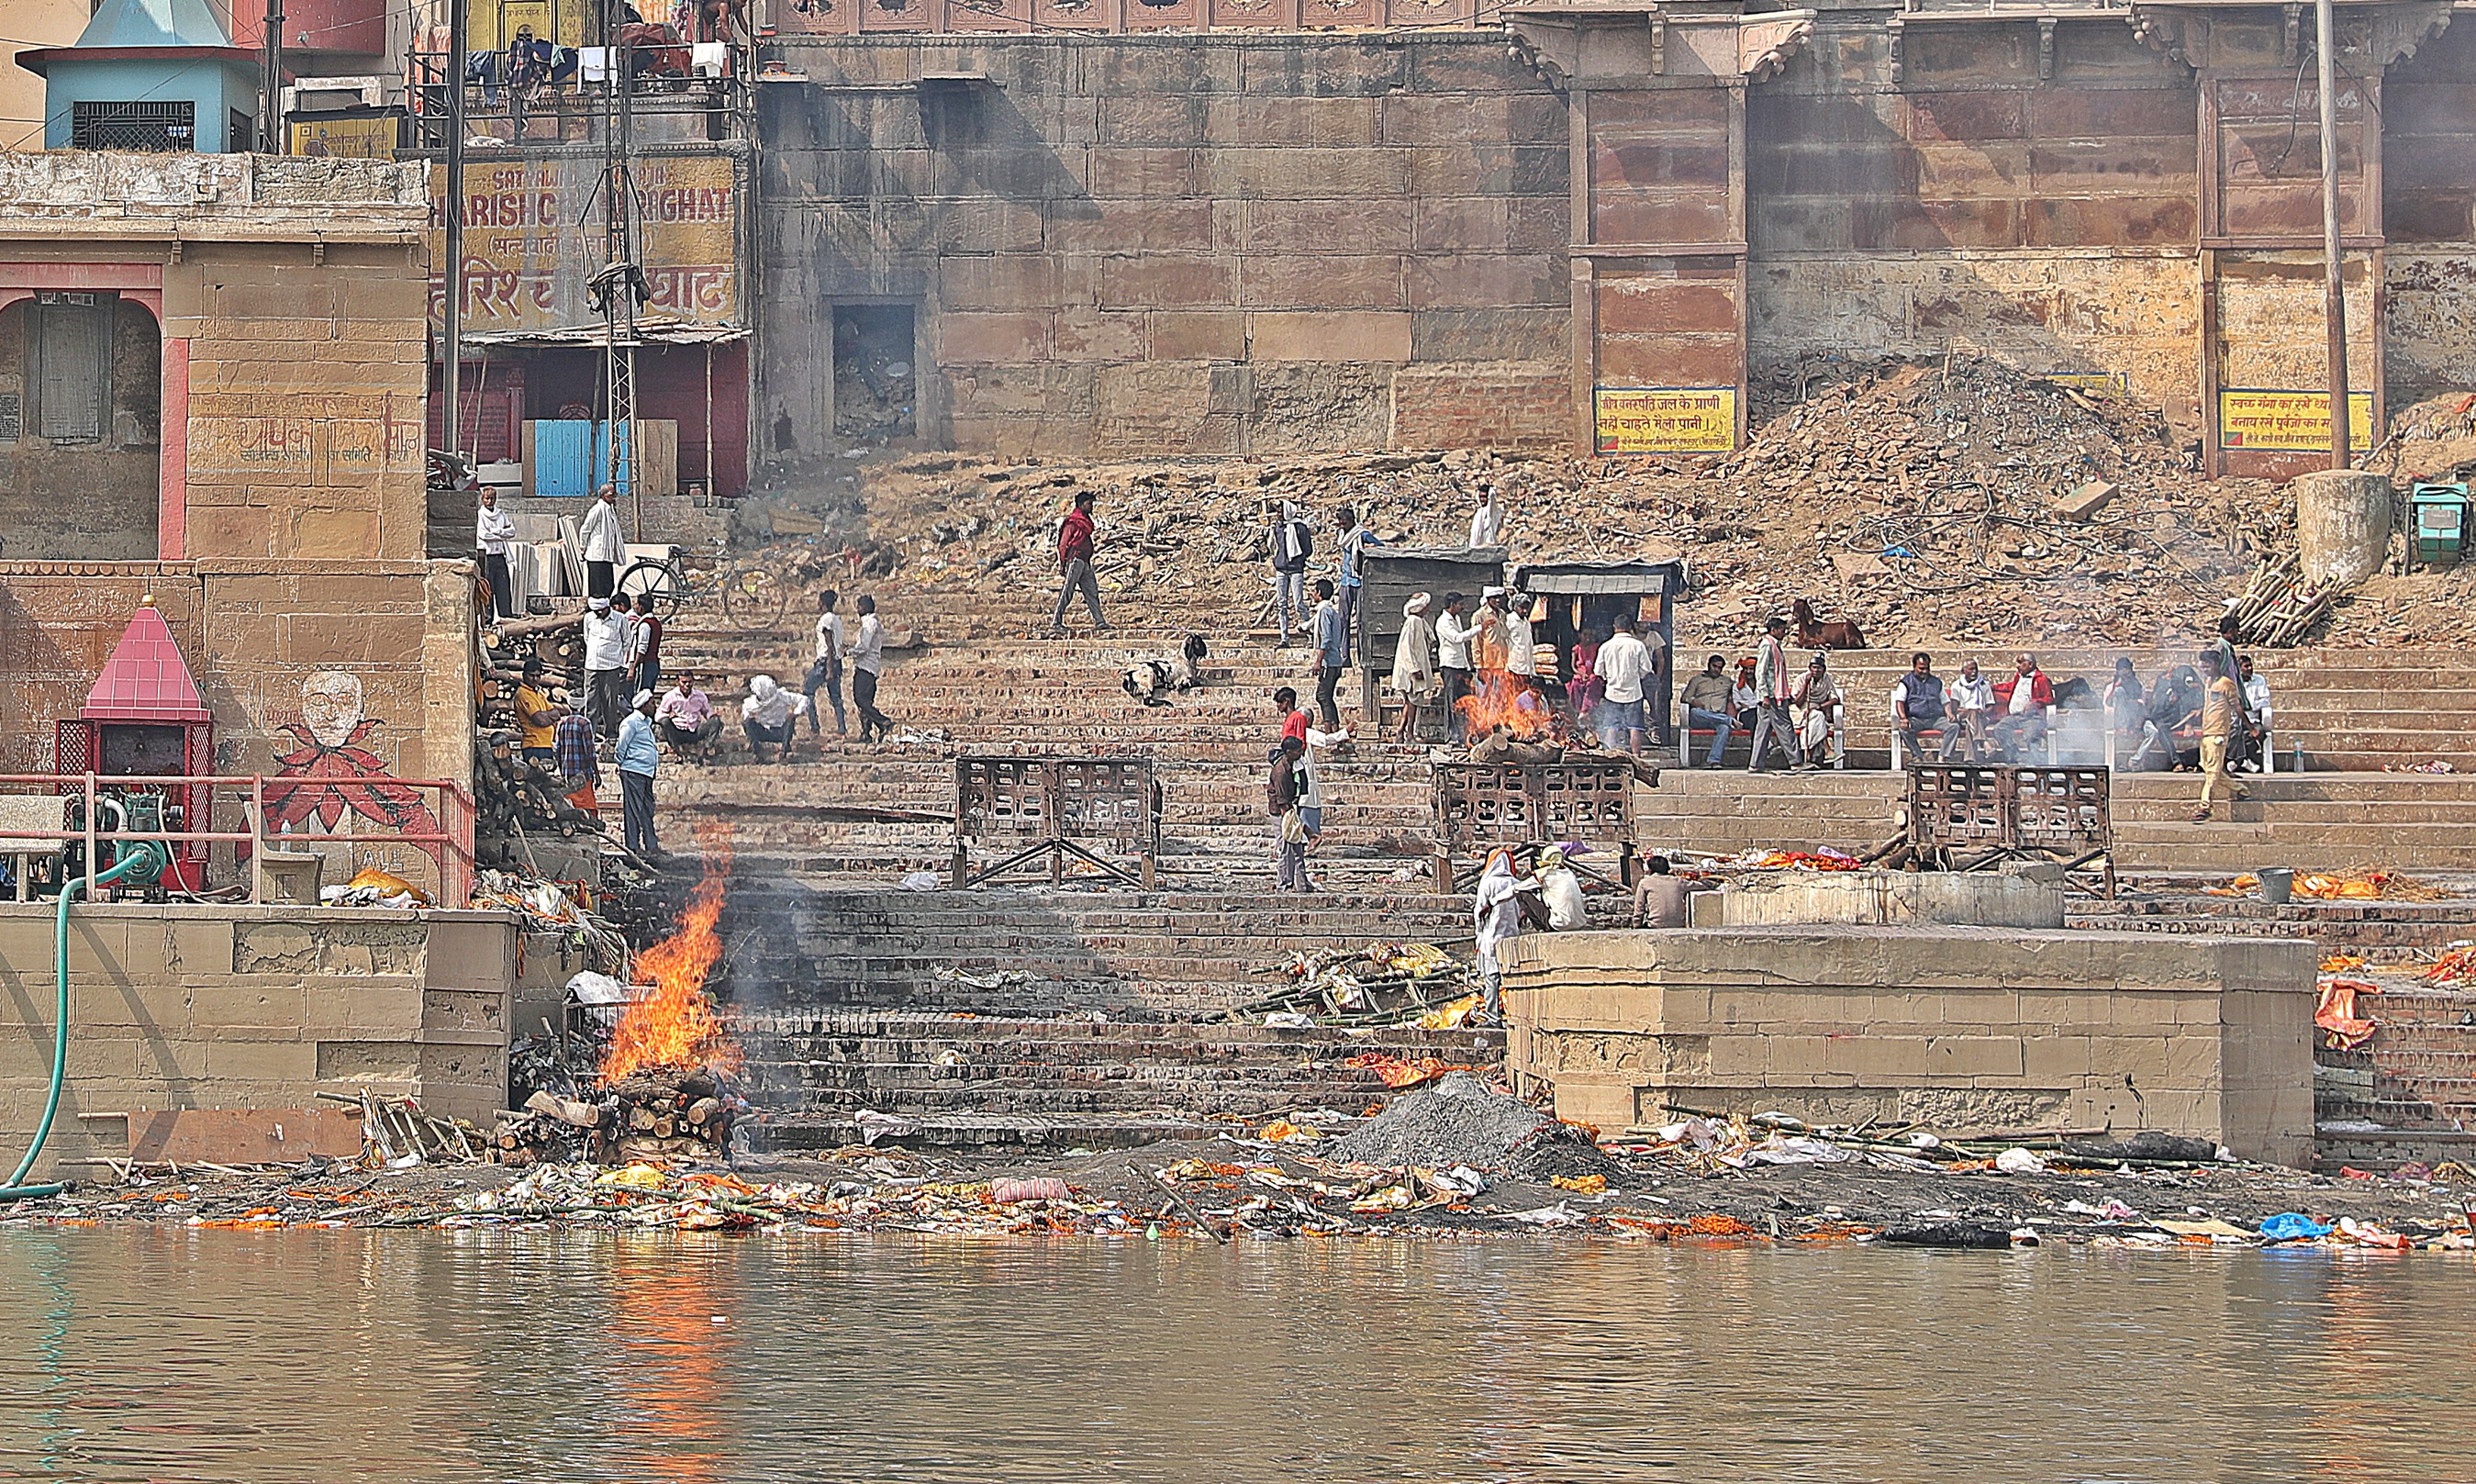 Cremation pollution in the Ganges